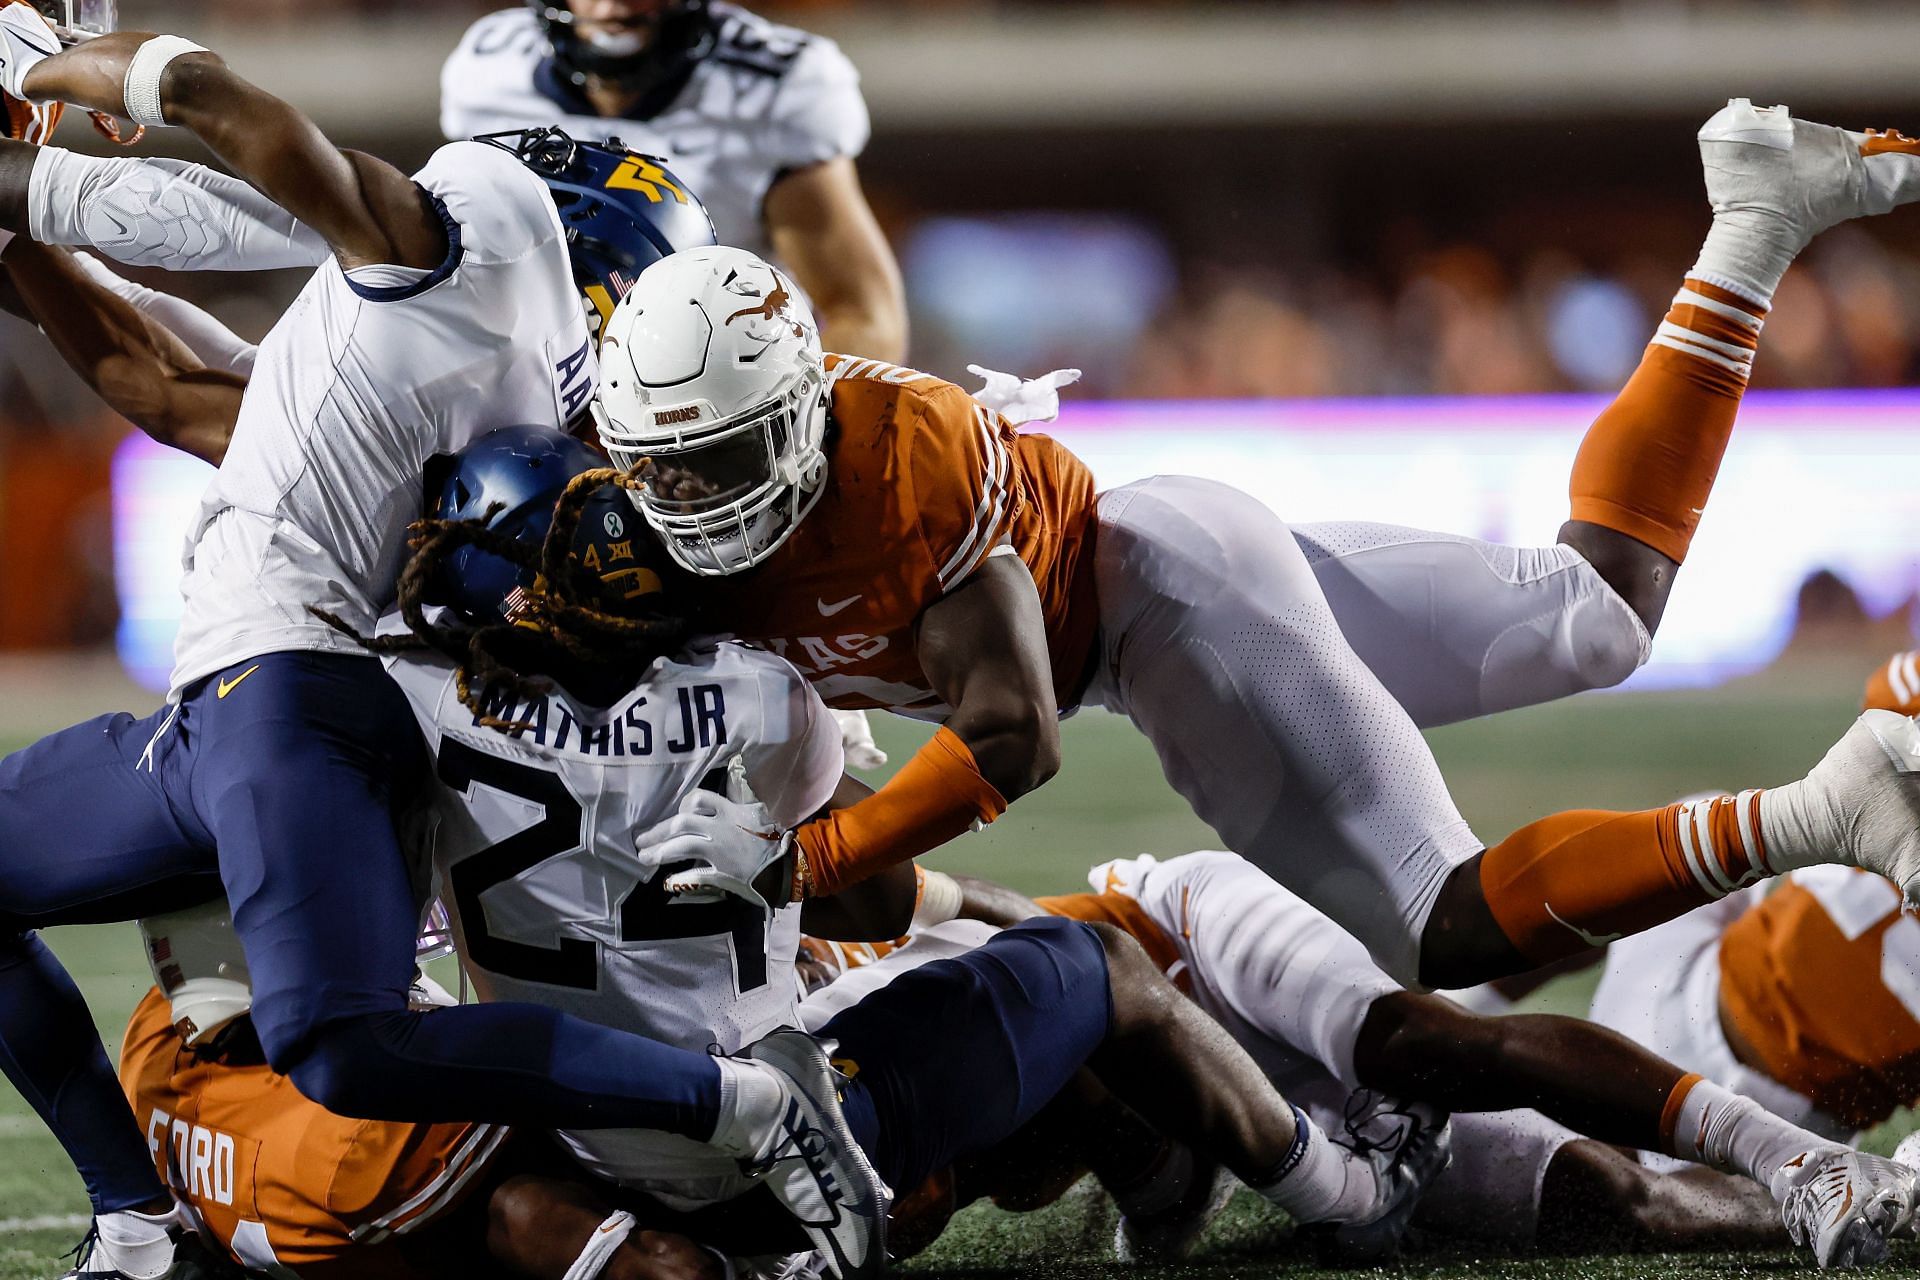 Tony Mathis Jr. #24 of the West Virginia Mountaineers is tackled by Jaylan Ford #41 and DeMarvion Overshown #0 of the Texas Longhorns